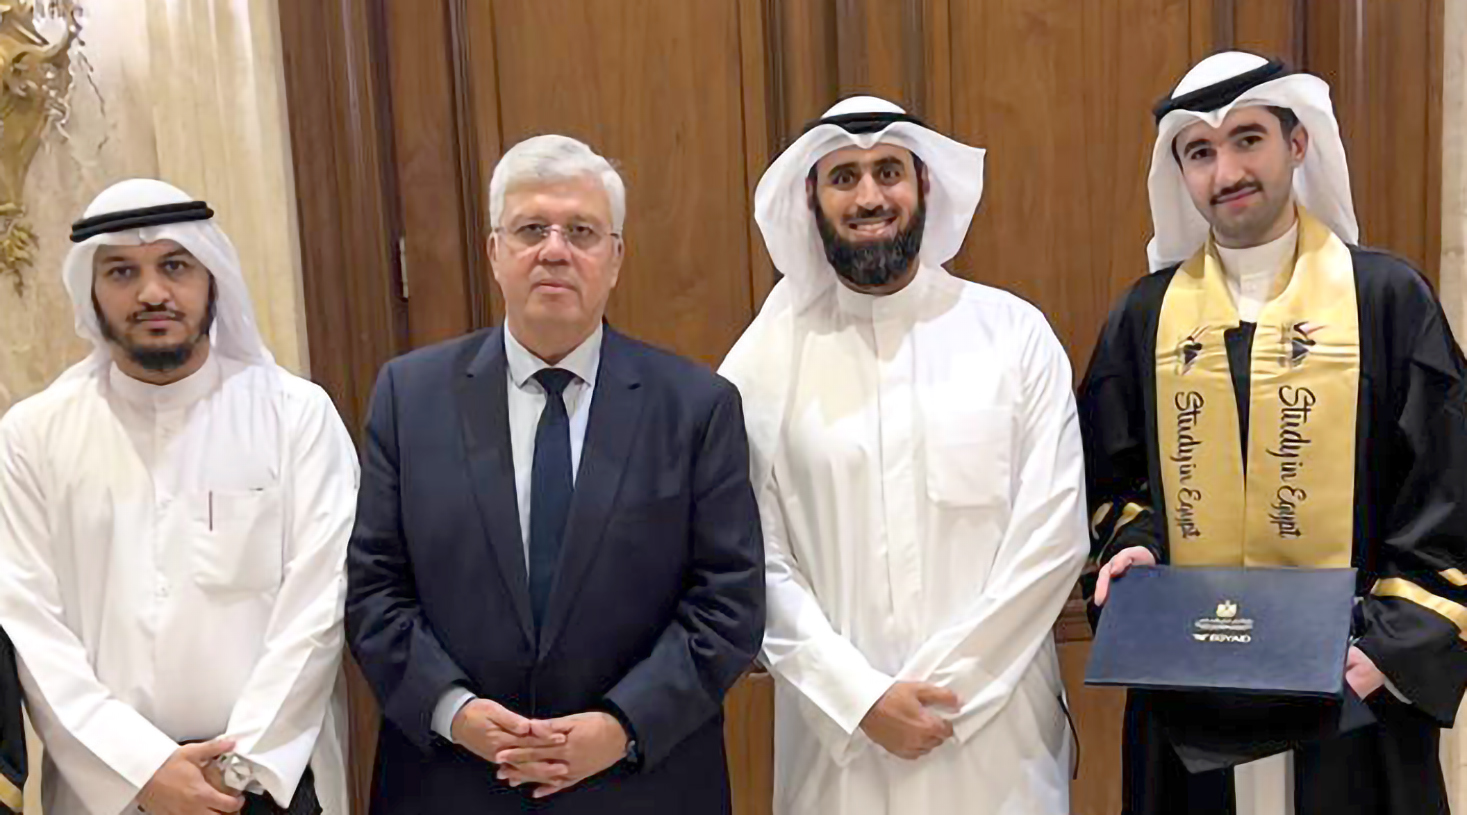  Egypt's Minister of Higher Education honors Kuwaiti students, hosted by Egypt and Islamic World Educational, Scientific and Cultural Organization (ICESCO).
